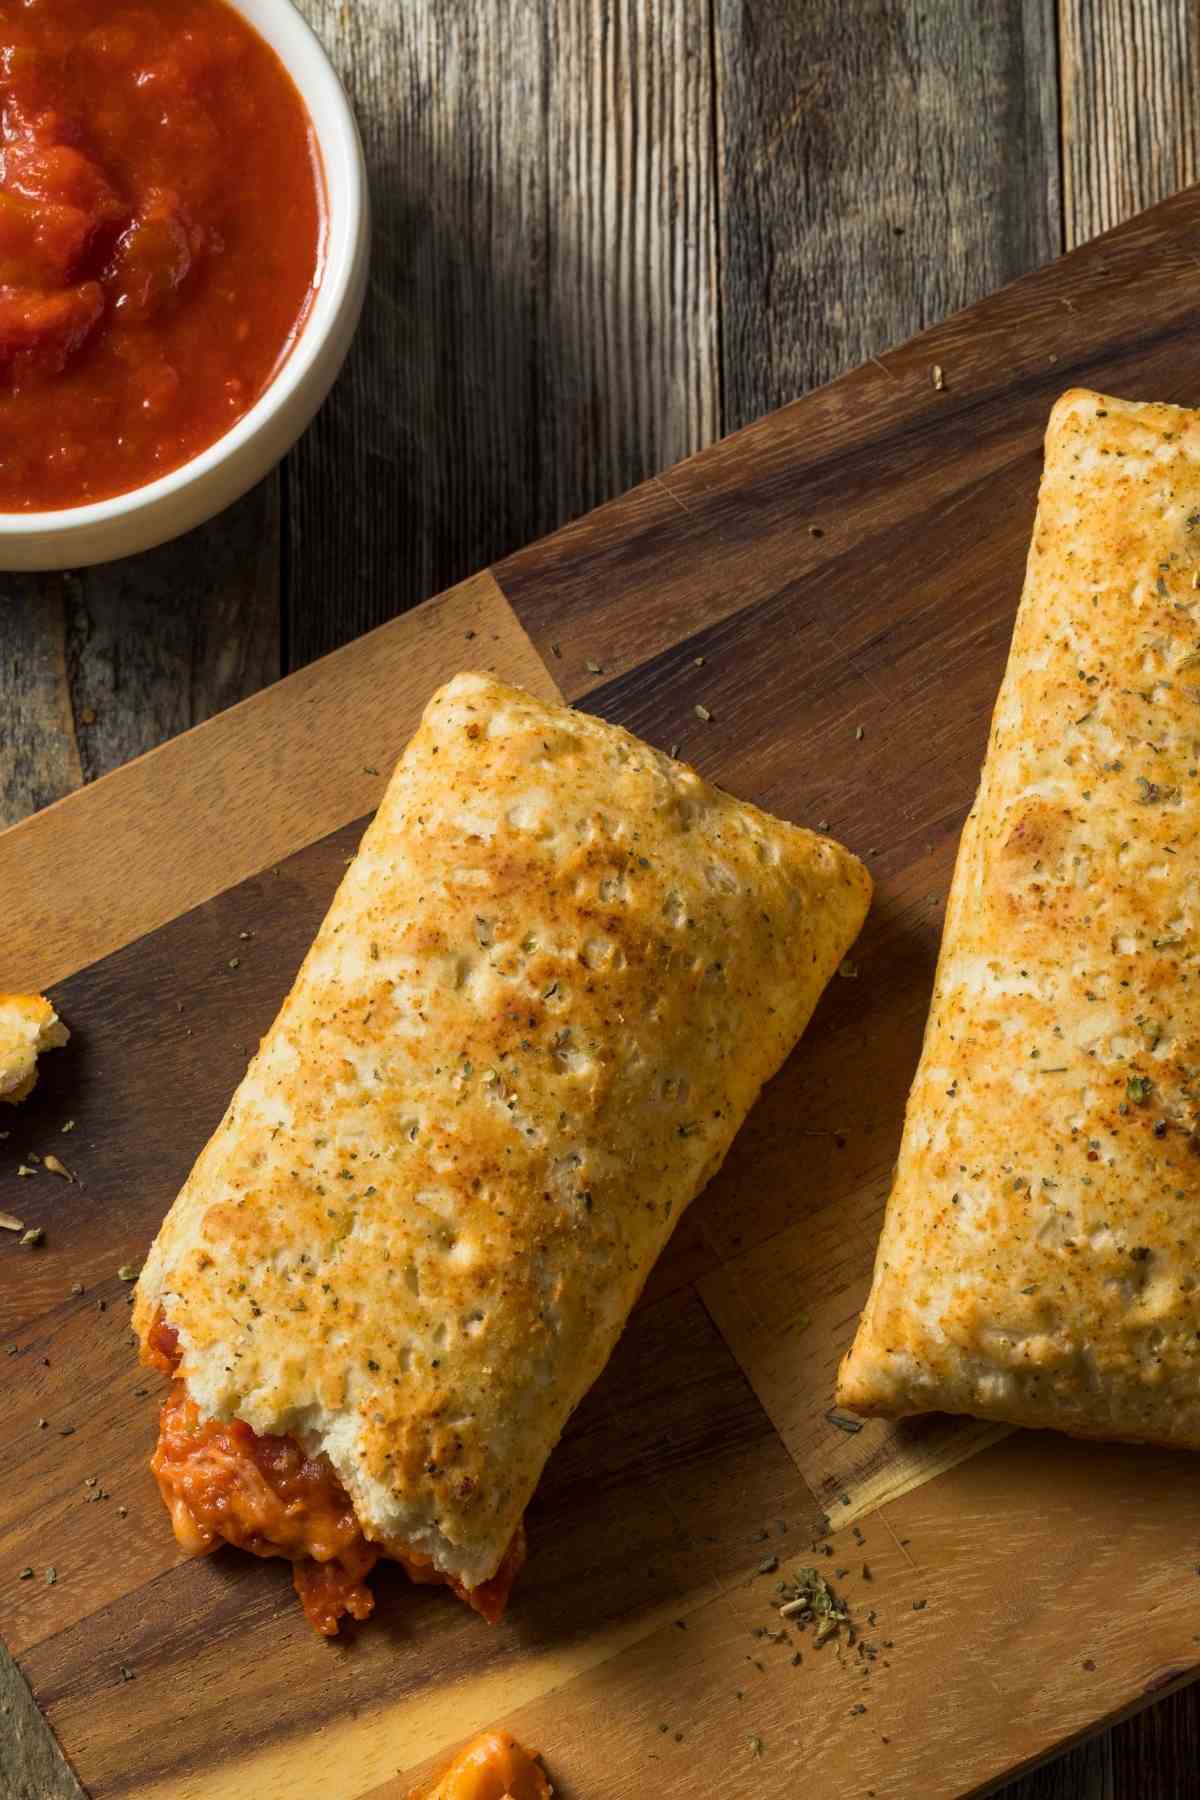 Hot Pockets are a fast and easy snack or a light lunch. They come in a variety of flavors and kids love them. If you’re in a rush, the easiest way to heat up a Hot Pocket is in the microwave. In today’s article we’re sharing some tips and tricks on how to safely heat Hot Pockets in the microwave.